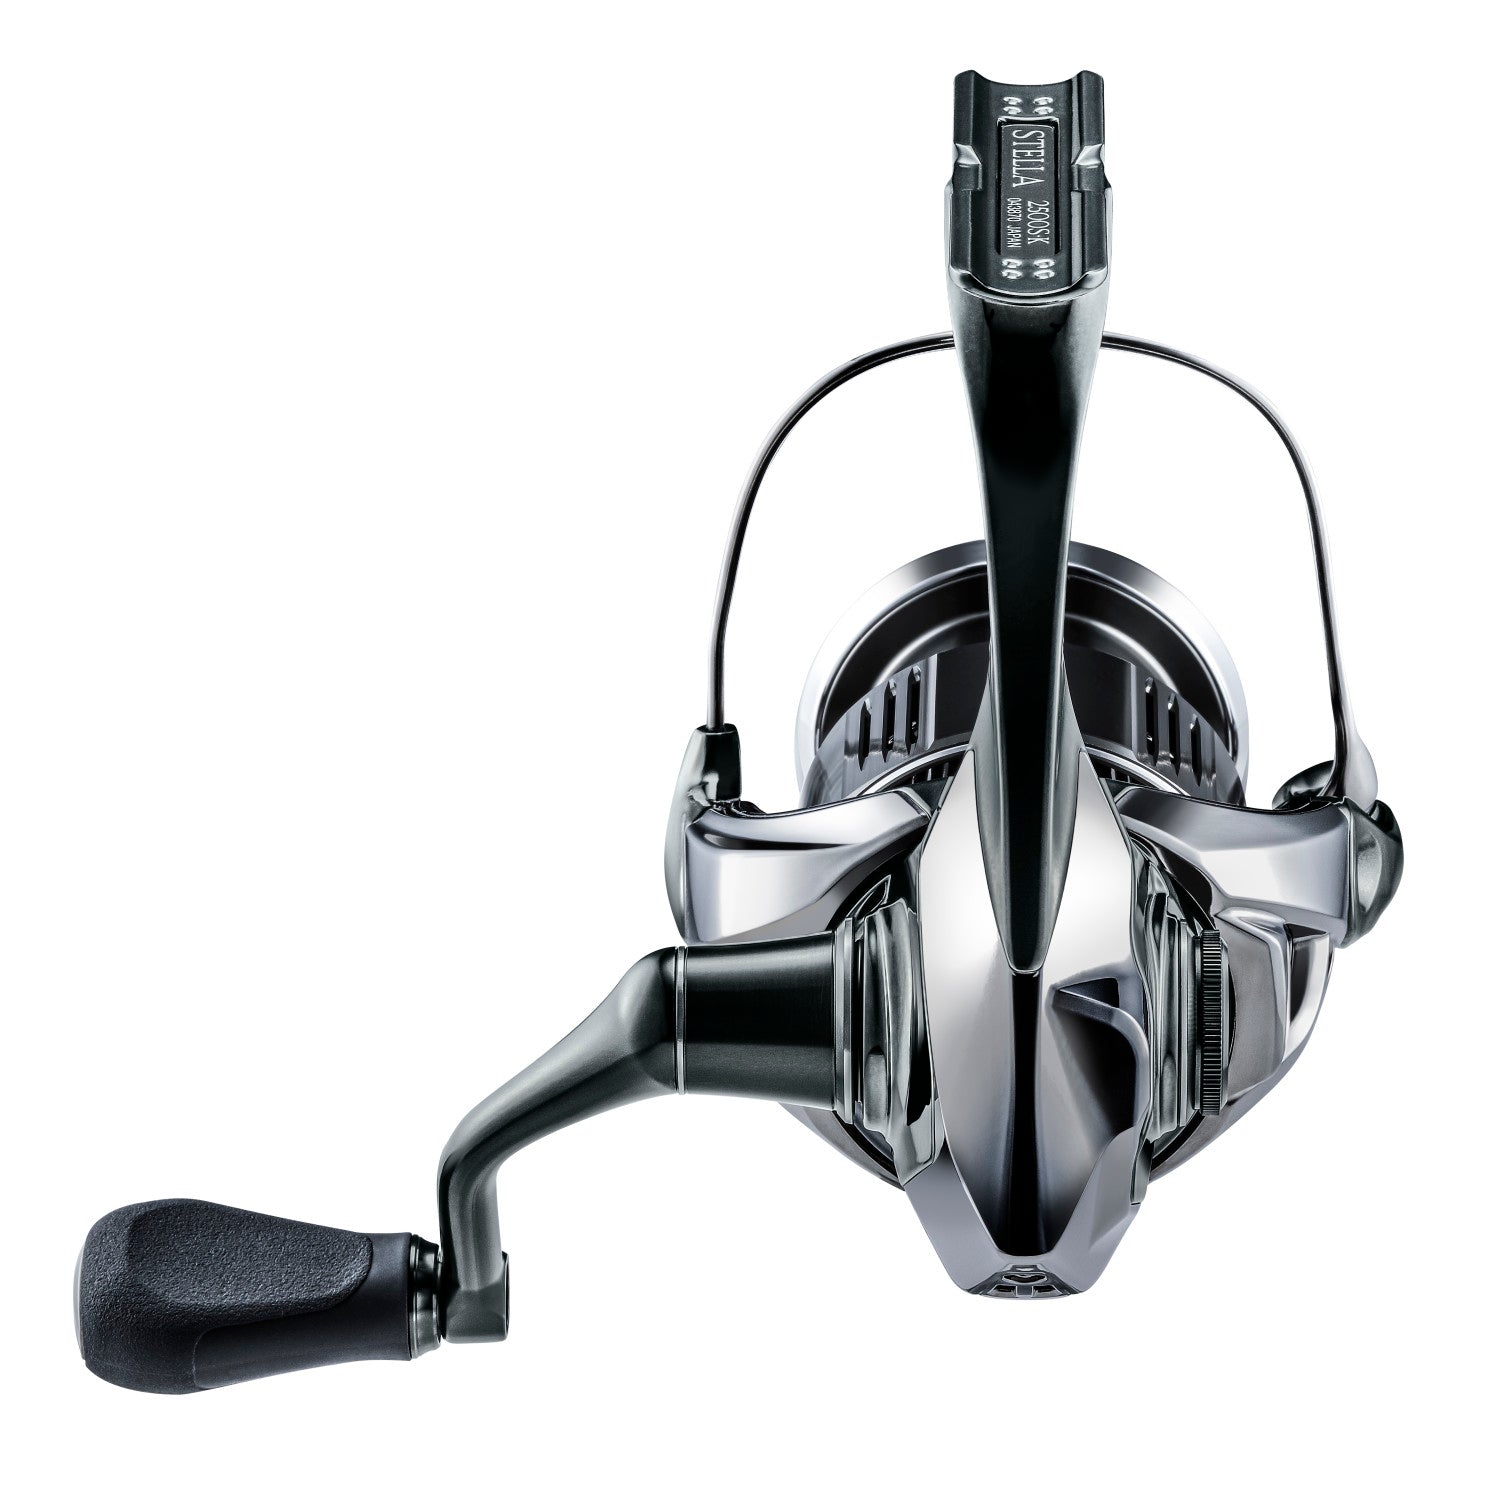 NEW SHIMANO SPINNING REEL PART - RD0851 TX100Q - Quick-Fire II Trigger  BLACK - Pioneer Recycling Services